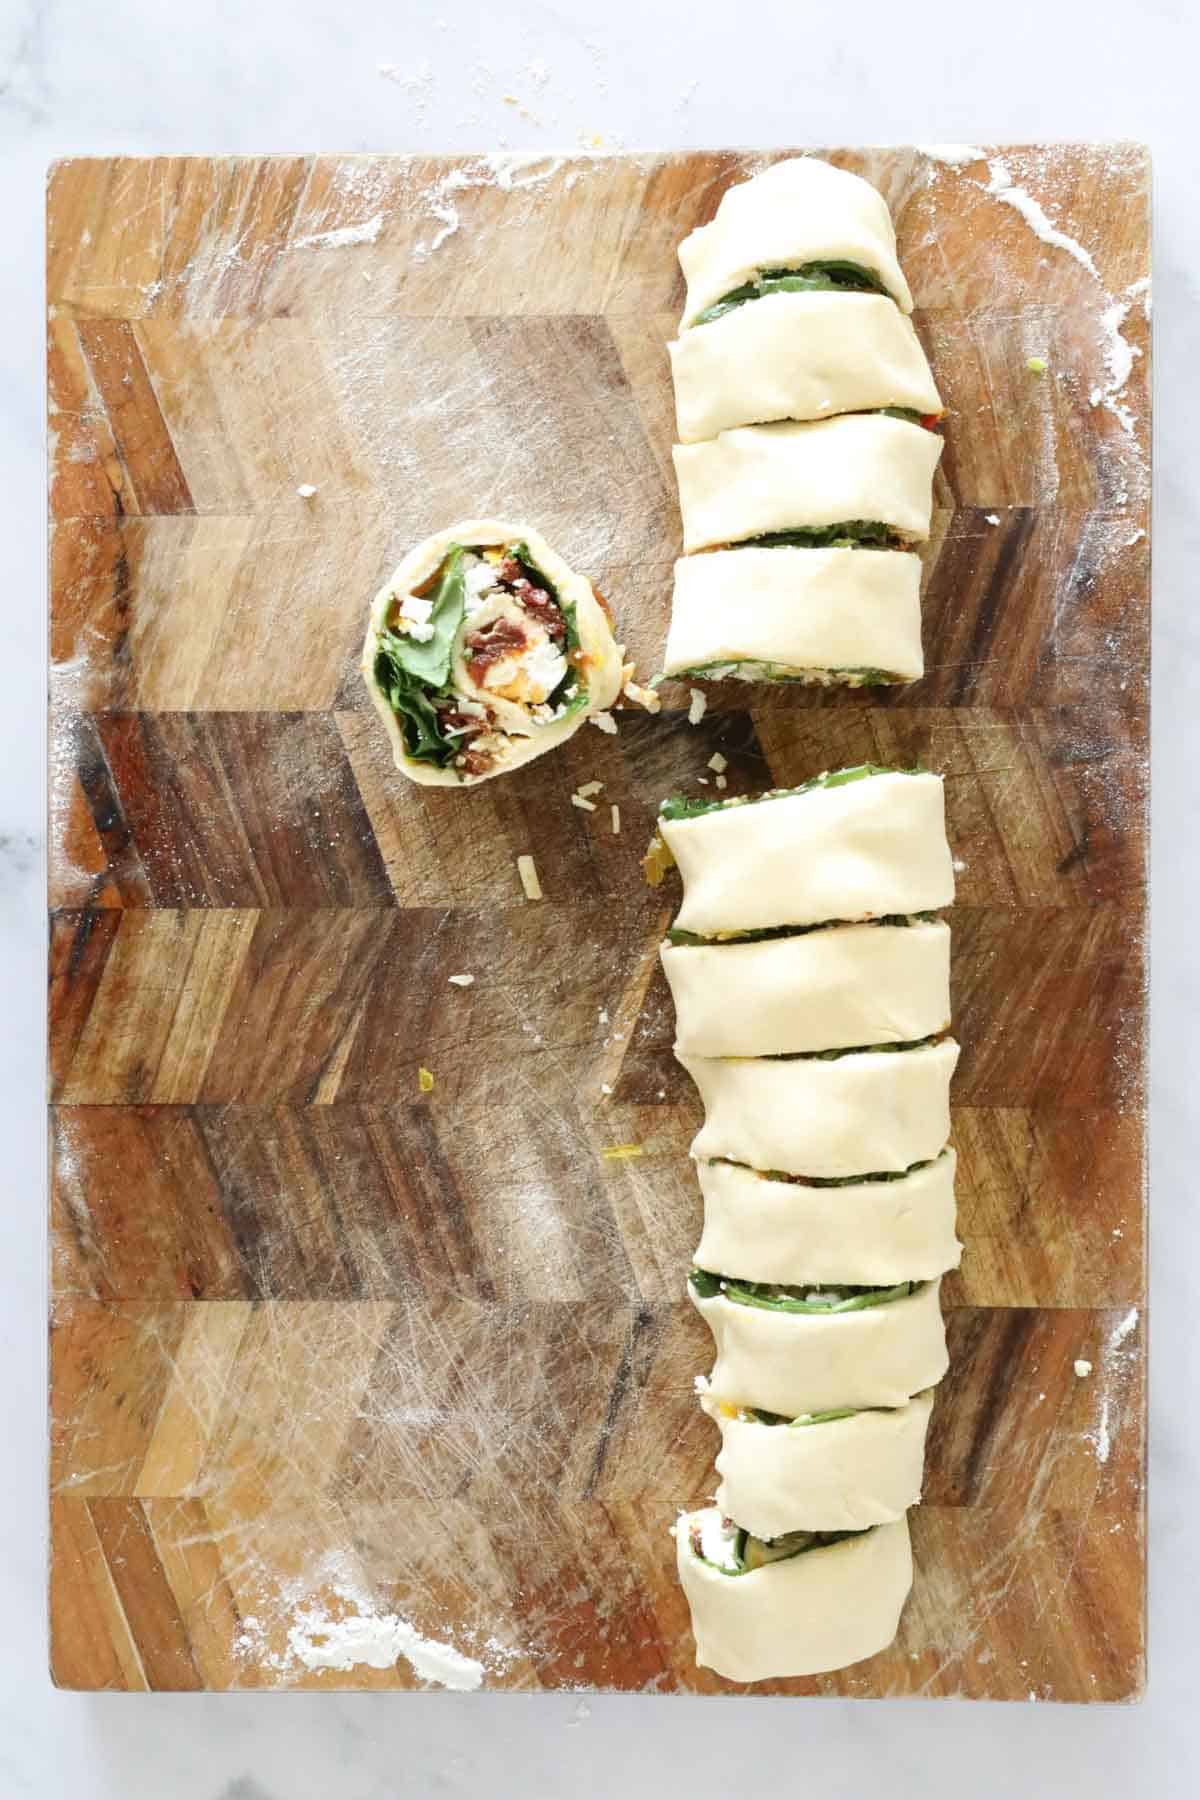 Pinwheel scroll with spinach being cut on a board.